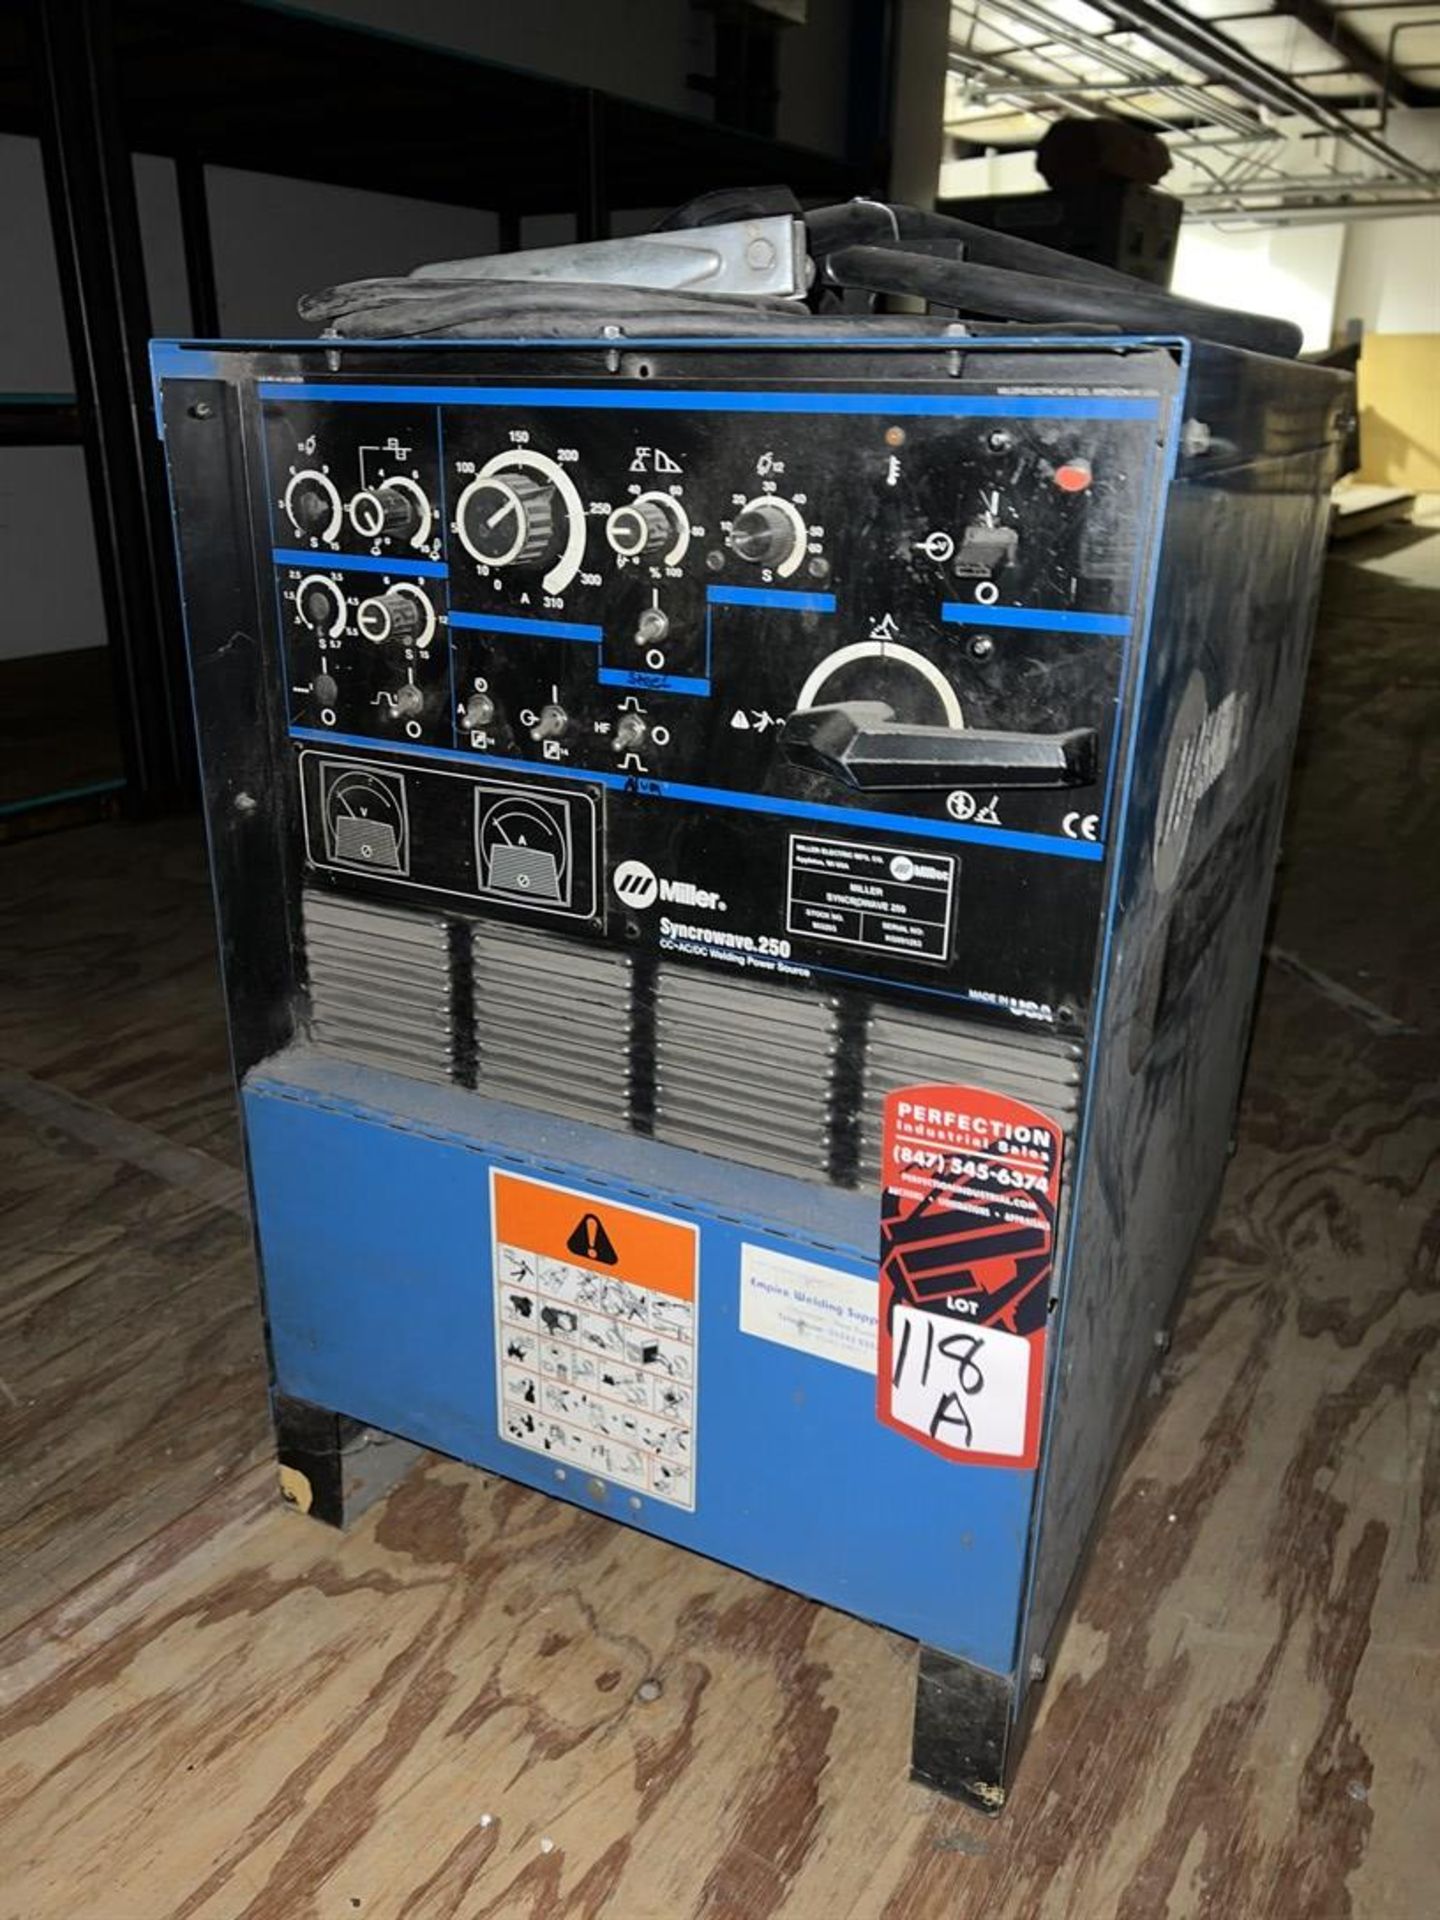 Miller Syncrowave 250 CC.AC/DC Welding Source (no cables or leads) located upstairs